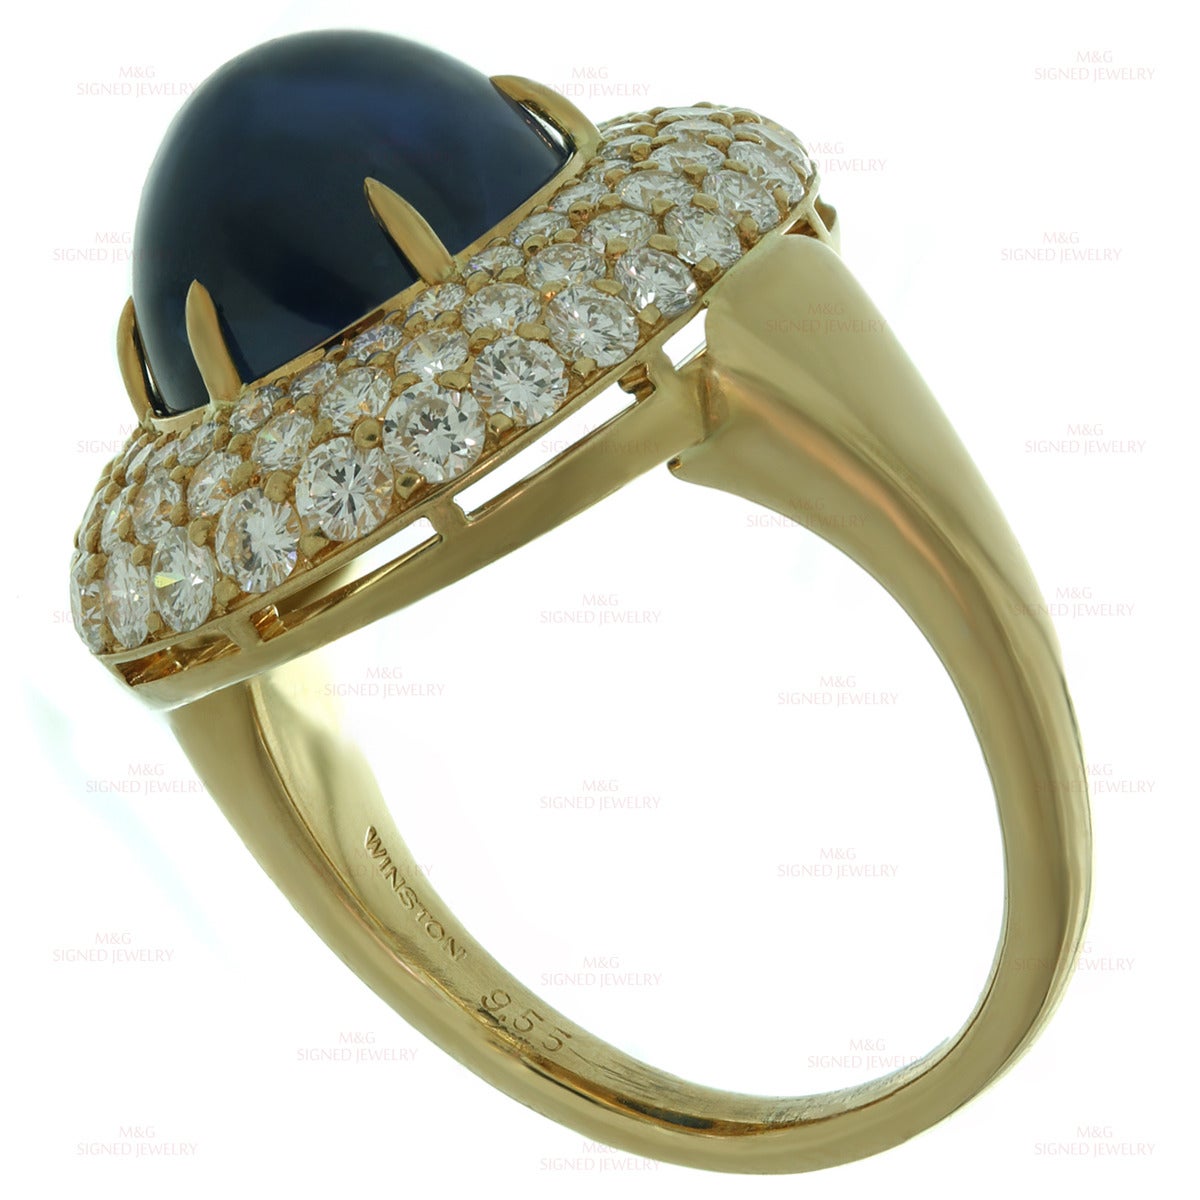 This exquisite Harry Winston ring is made in 18k yellow gold and set with a stunningly vivid blue oval cabochon sapphire of an estimated 9.55 carats surrounded by brilliant-cut round F-G VVS2-VS1 diamonds of an estimated 2.7 carats. Made in United